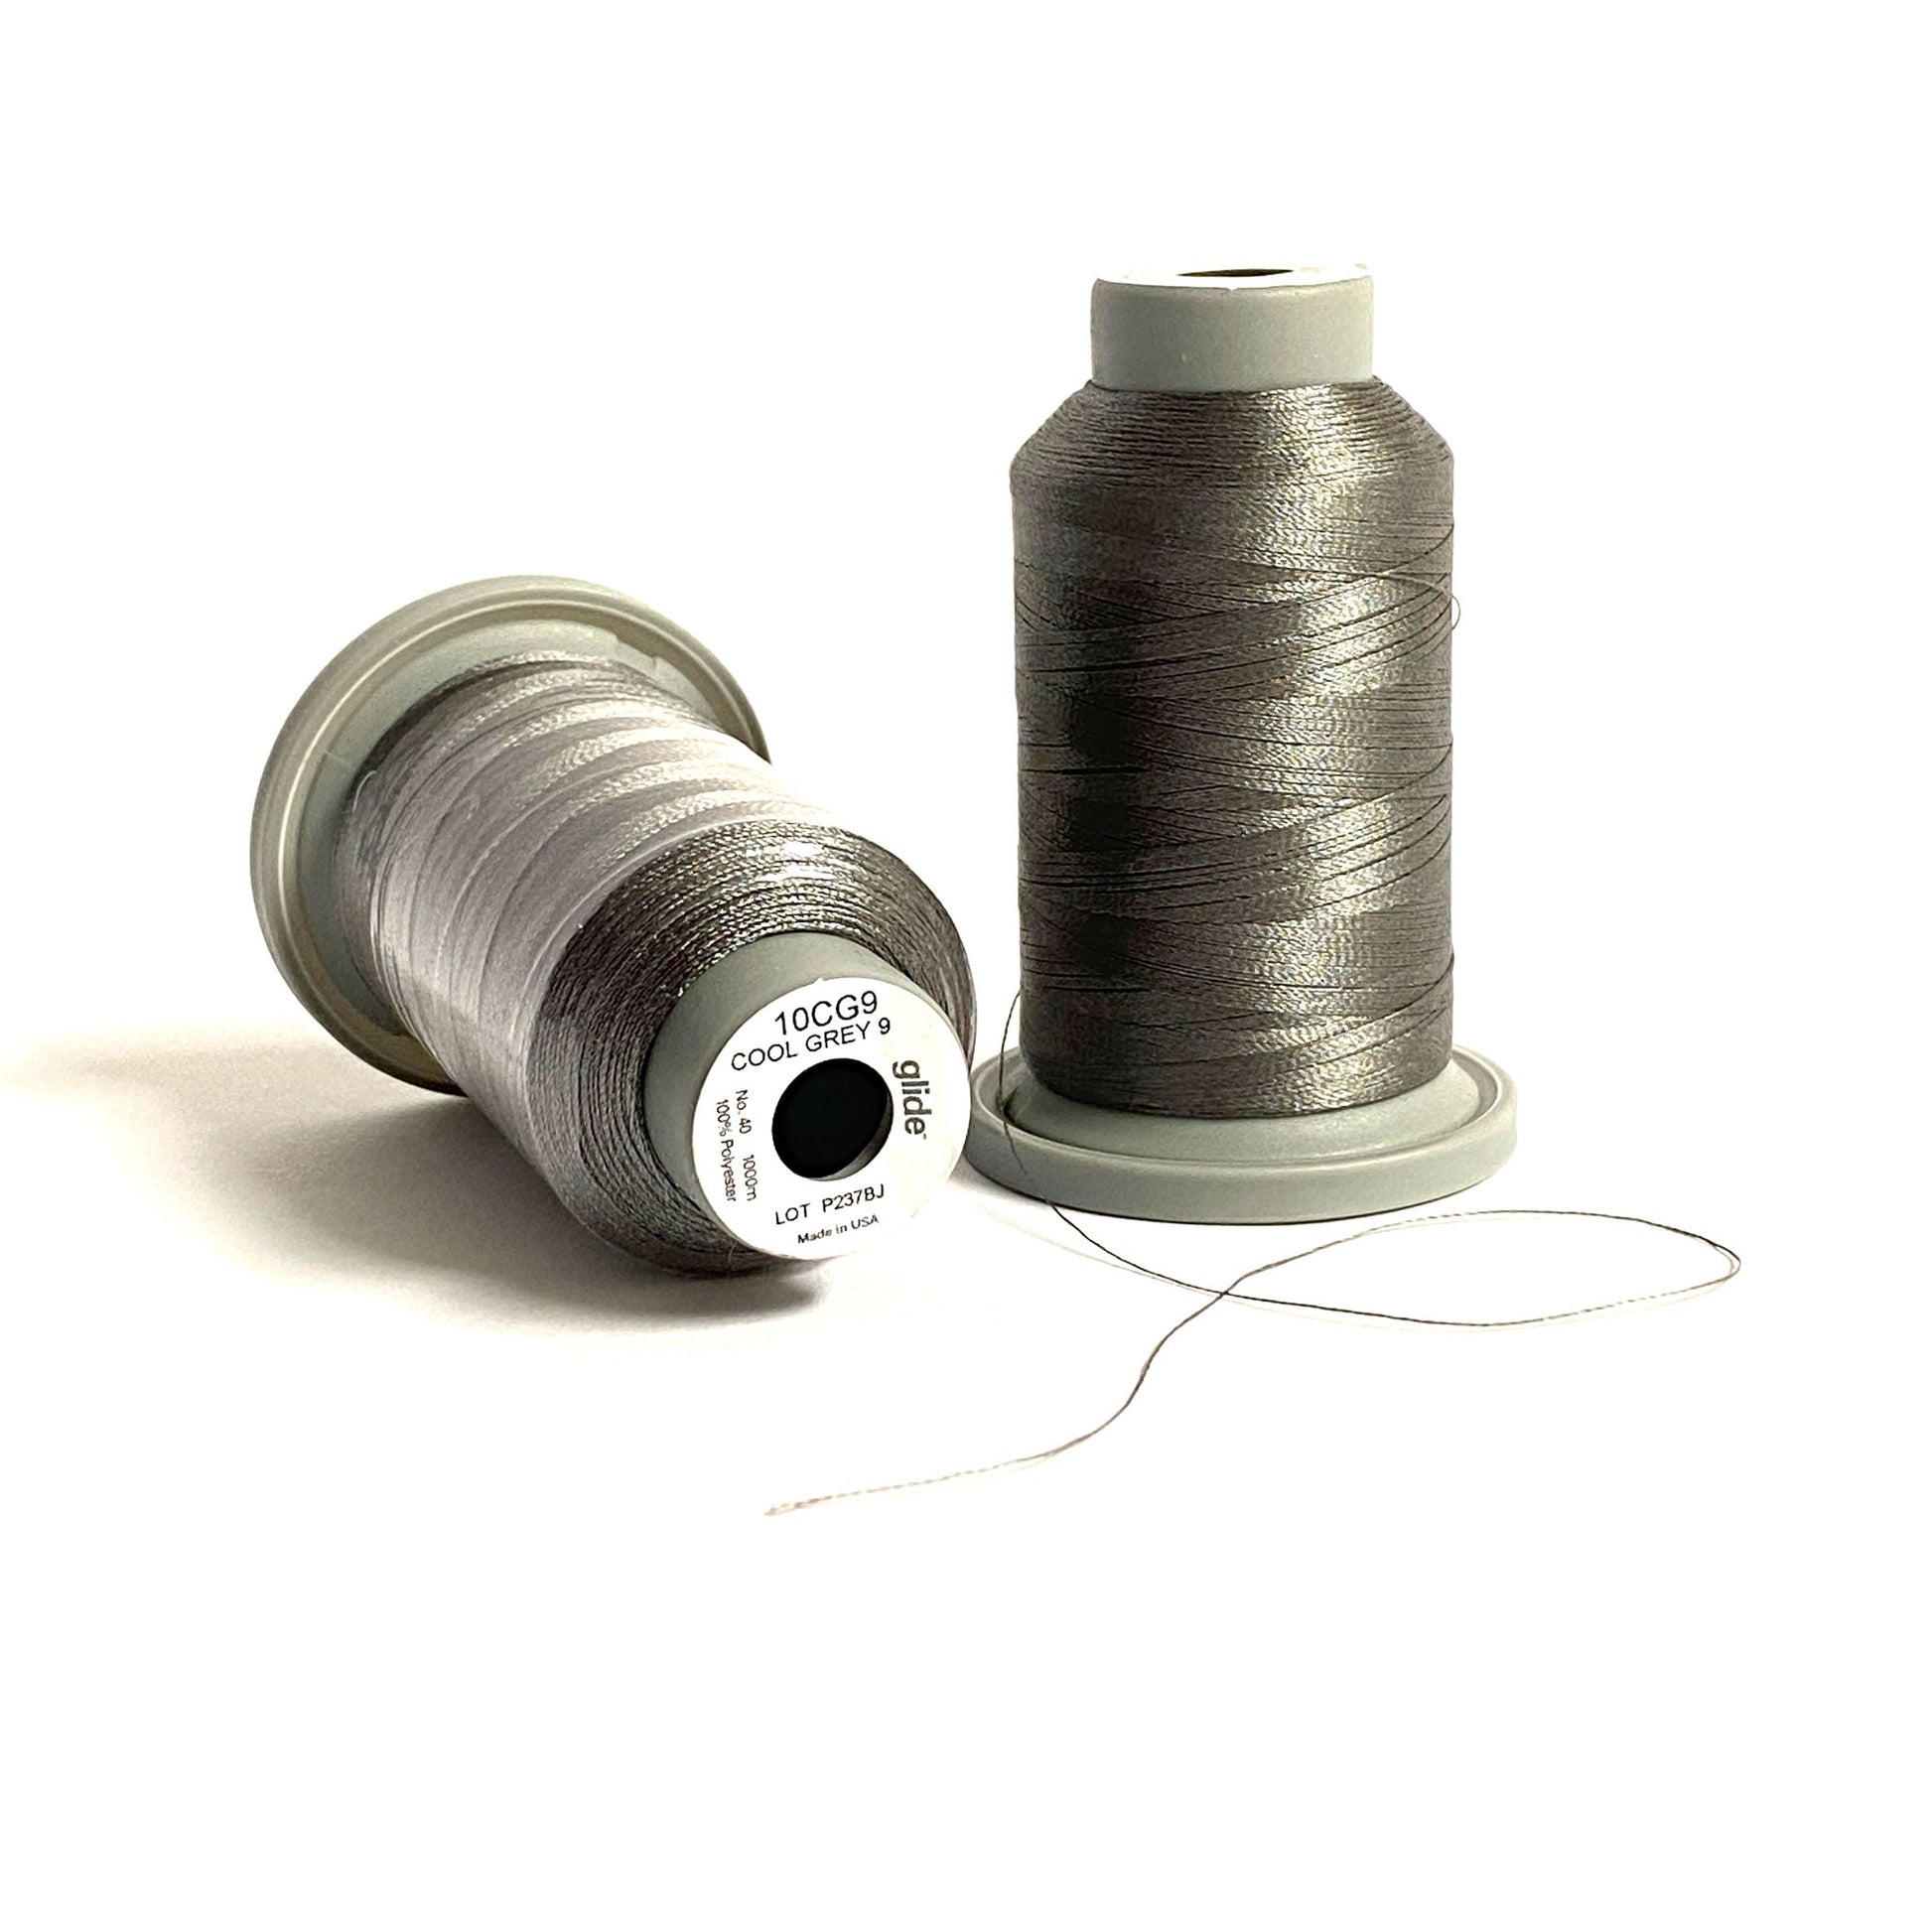 Glide 40 wt. Trilobal Polyester by Fil-Tec come in a mini spool of 1,100 yards of thread. Cool Grey 9 (10CG9) is a medium shade grey, perfect for woodland creature or construction embroidery and thread-painting. Stitcher's Joy